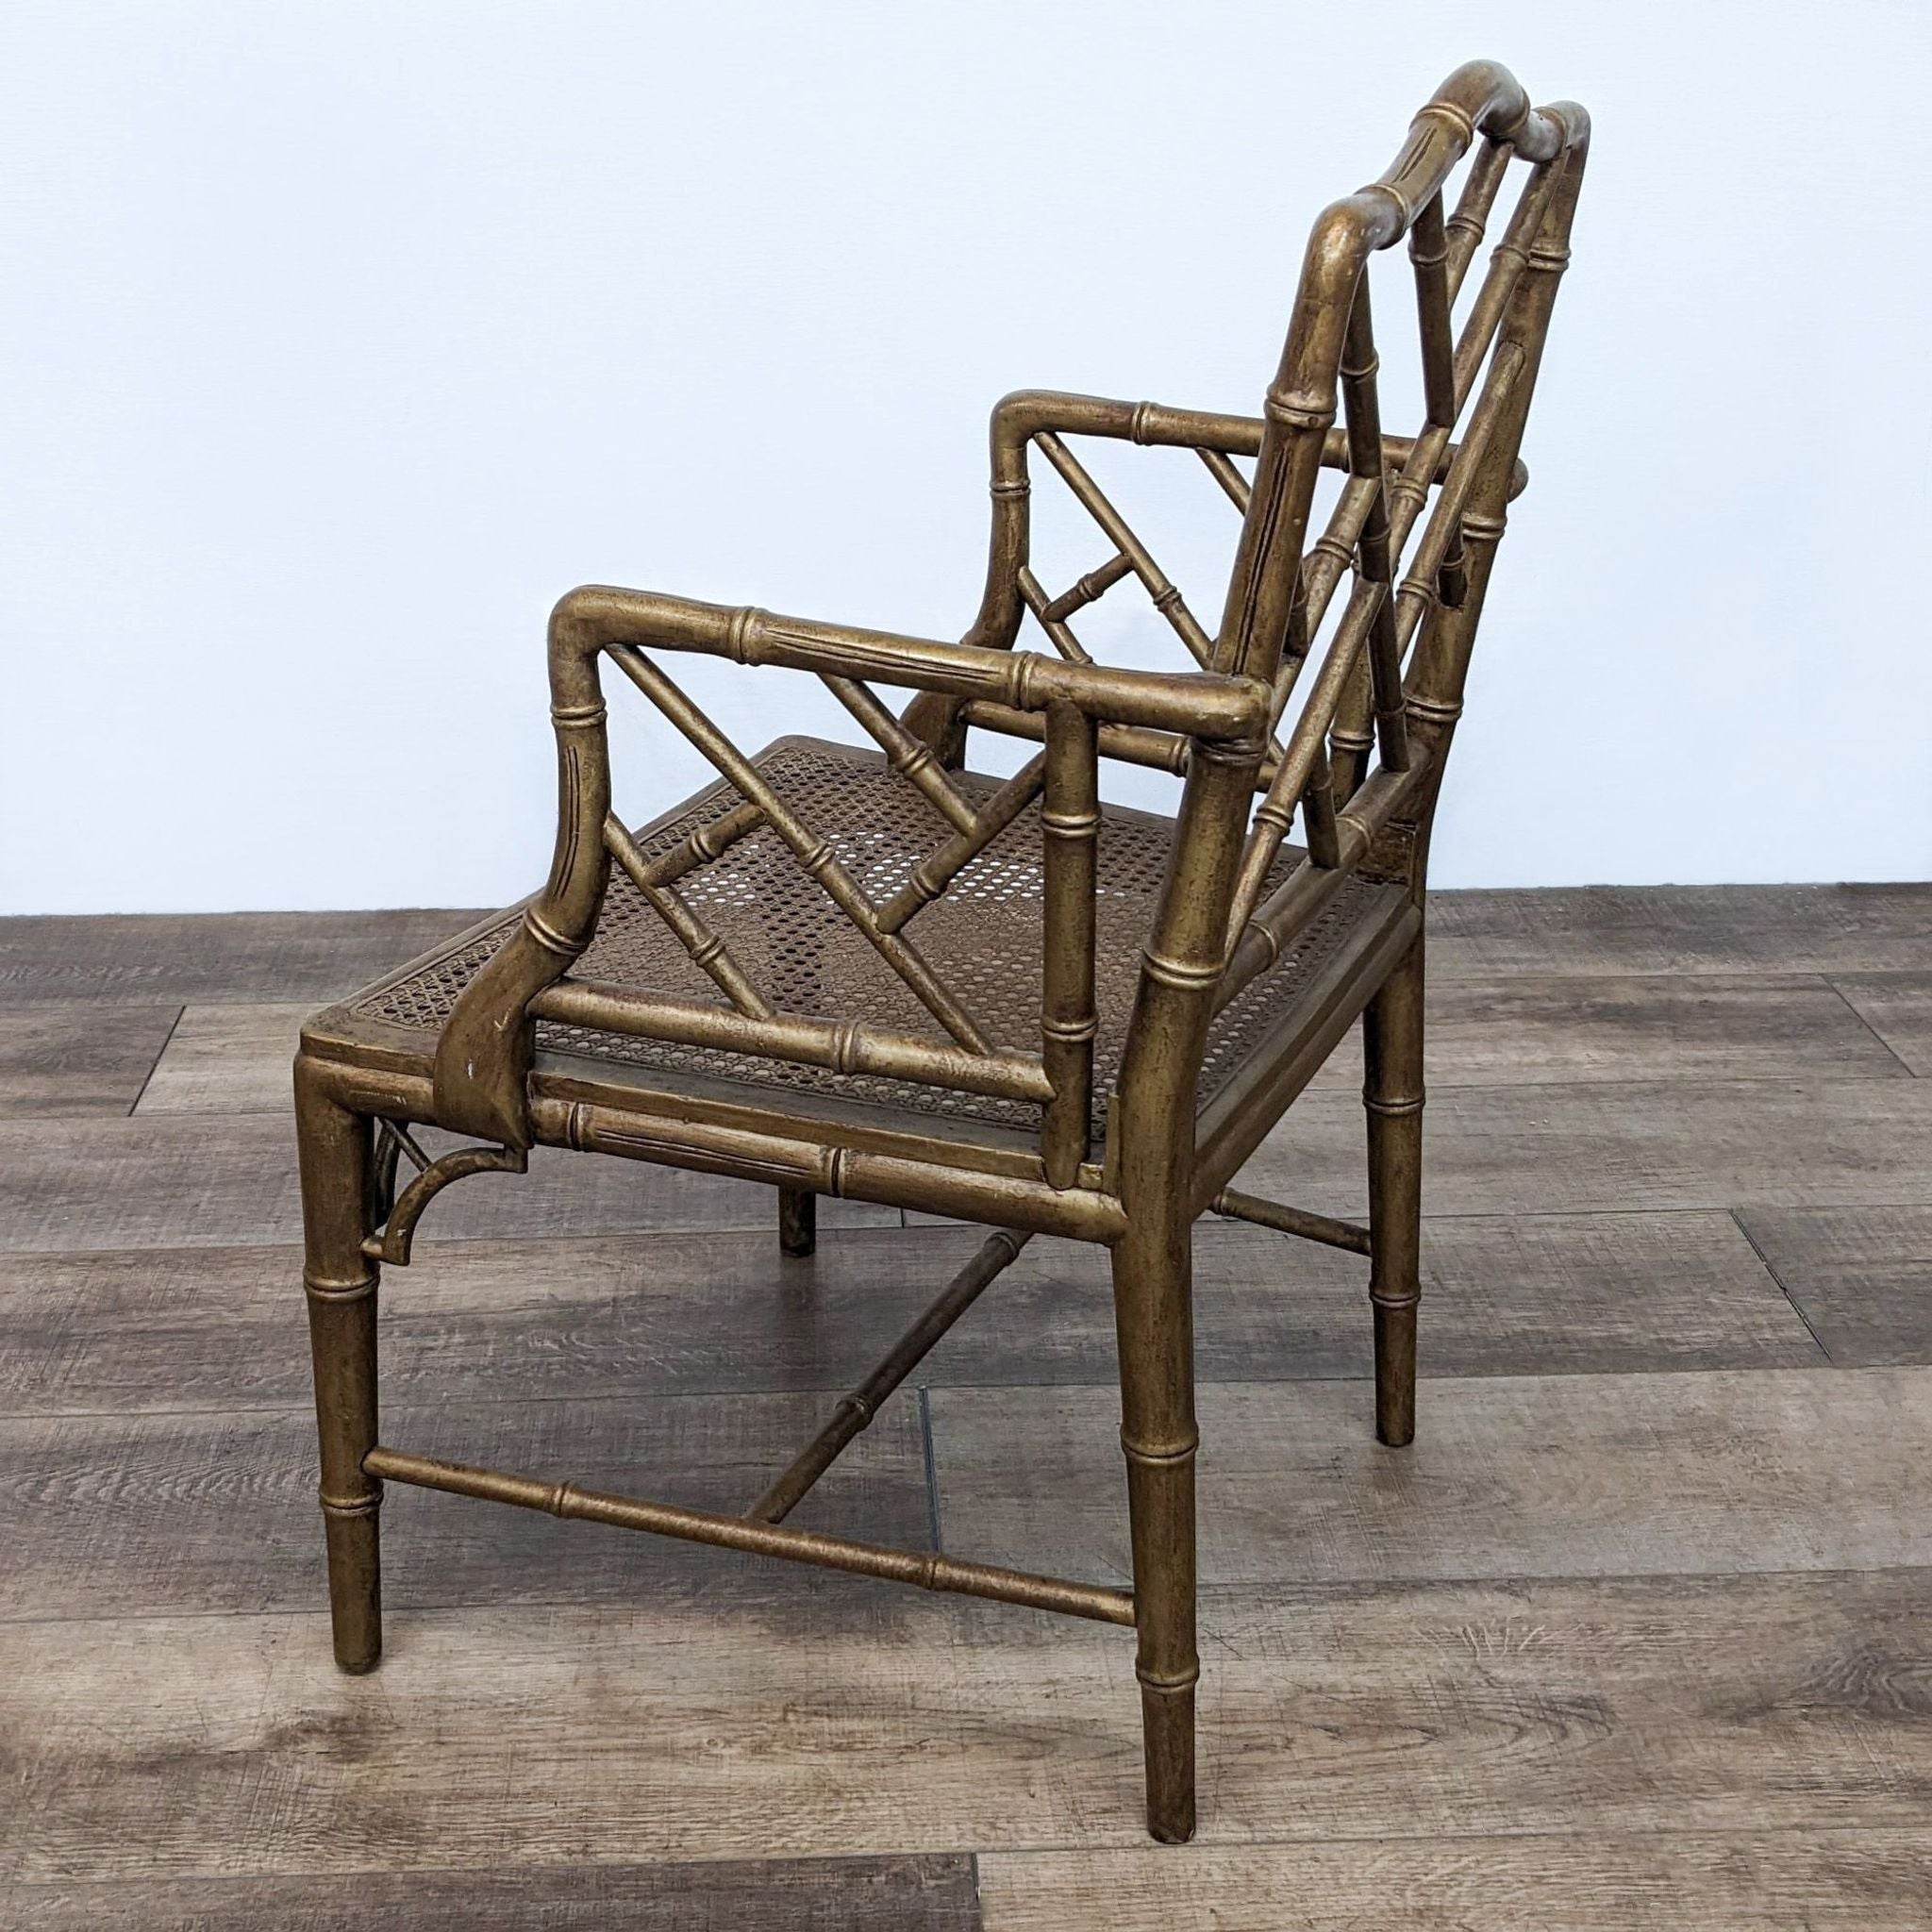 Reperch dining chair featuring an exotic bamboo design with a comfortable rattan weave seat, pictured from an angle.